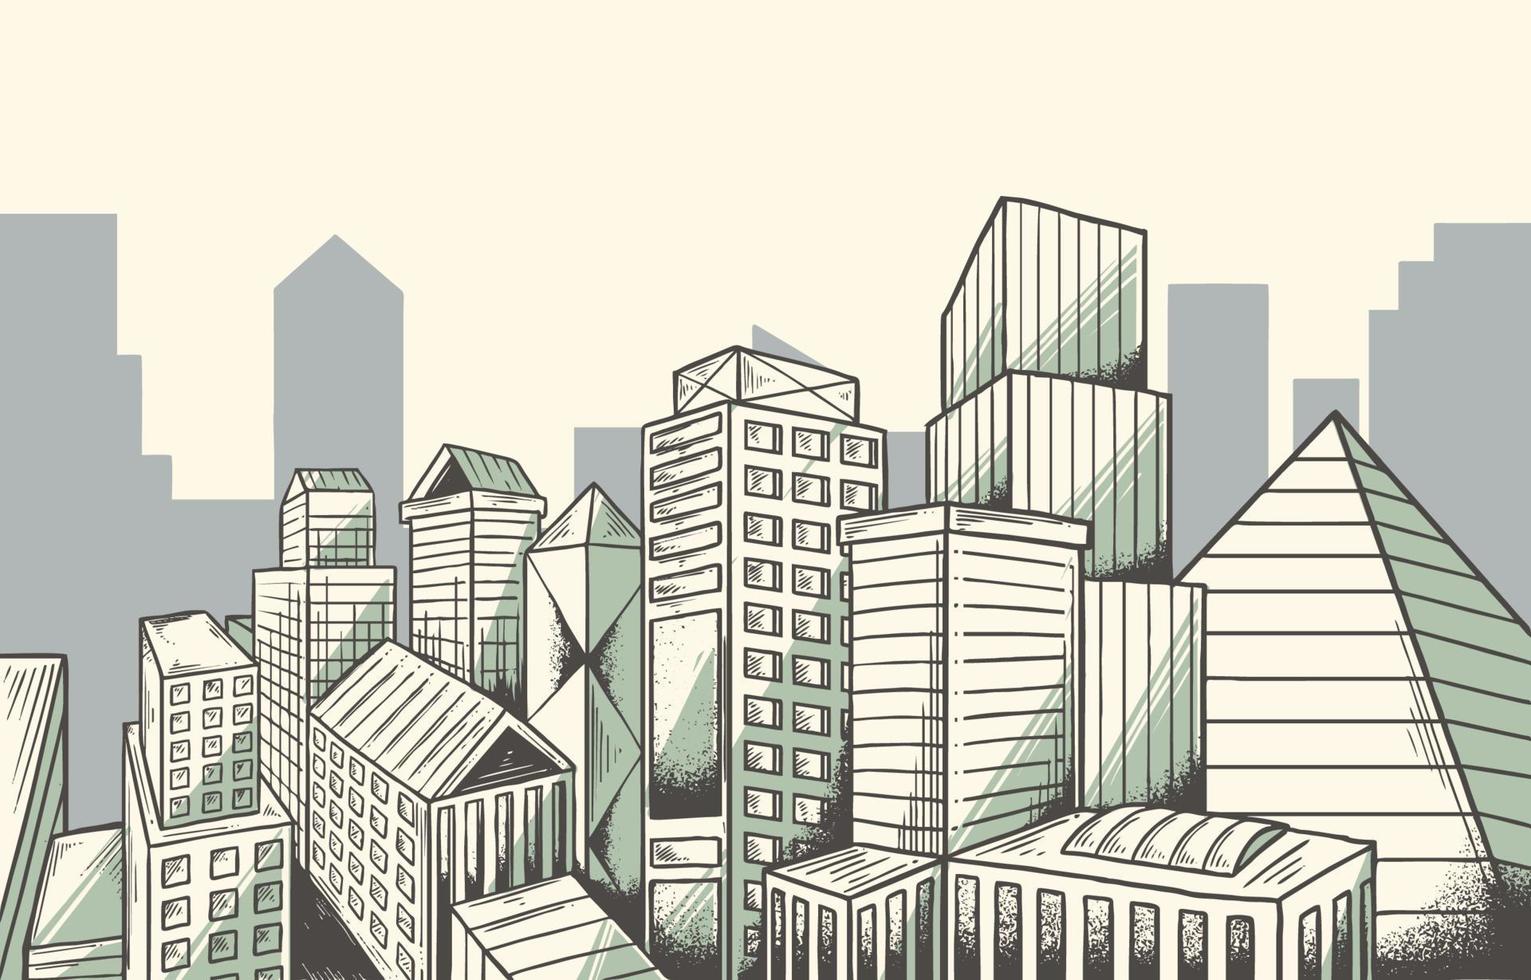 city scape hand drawn illustration background vector